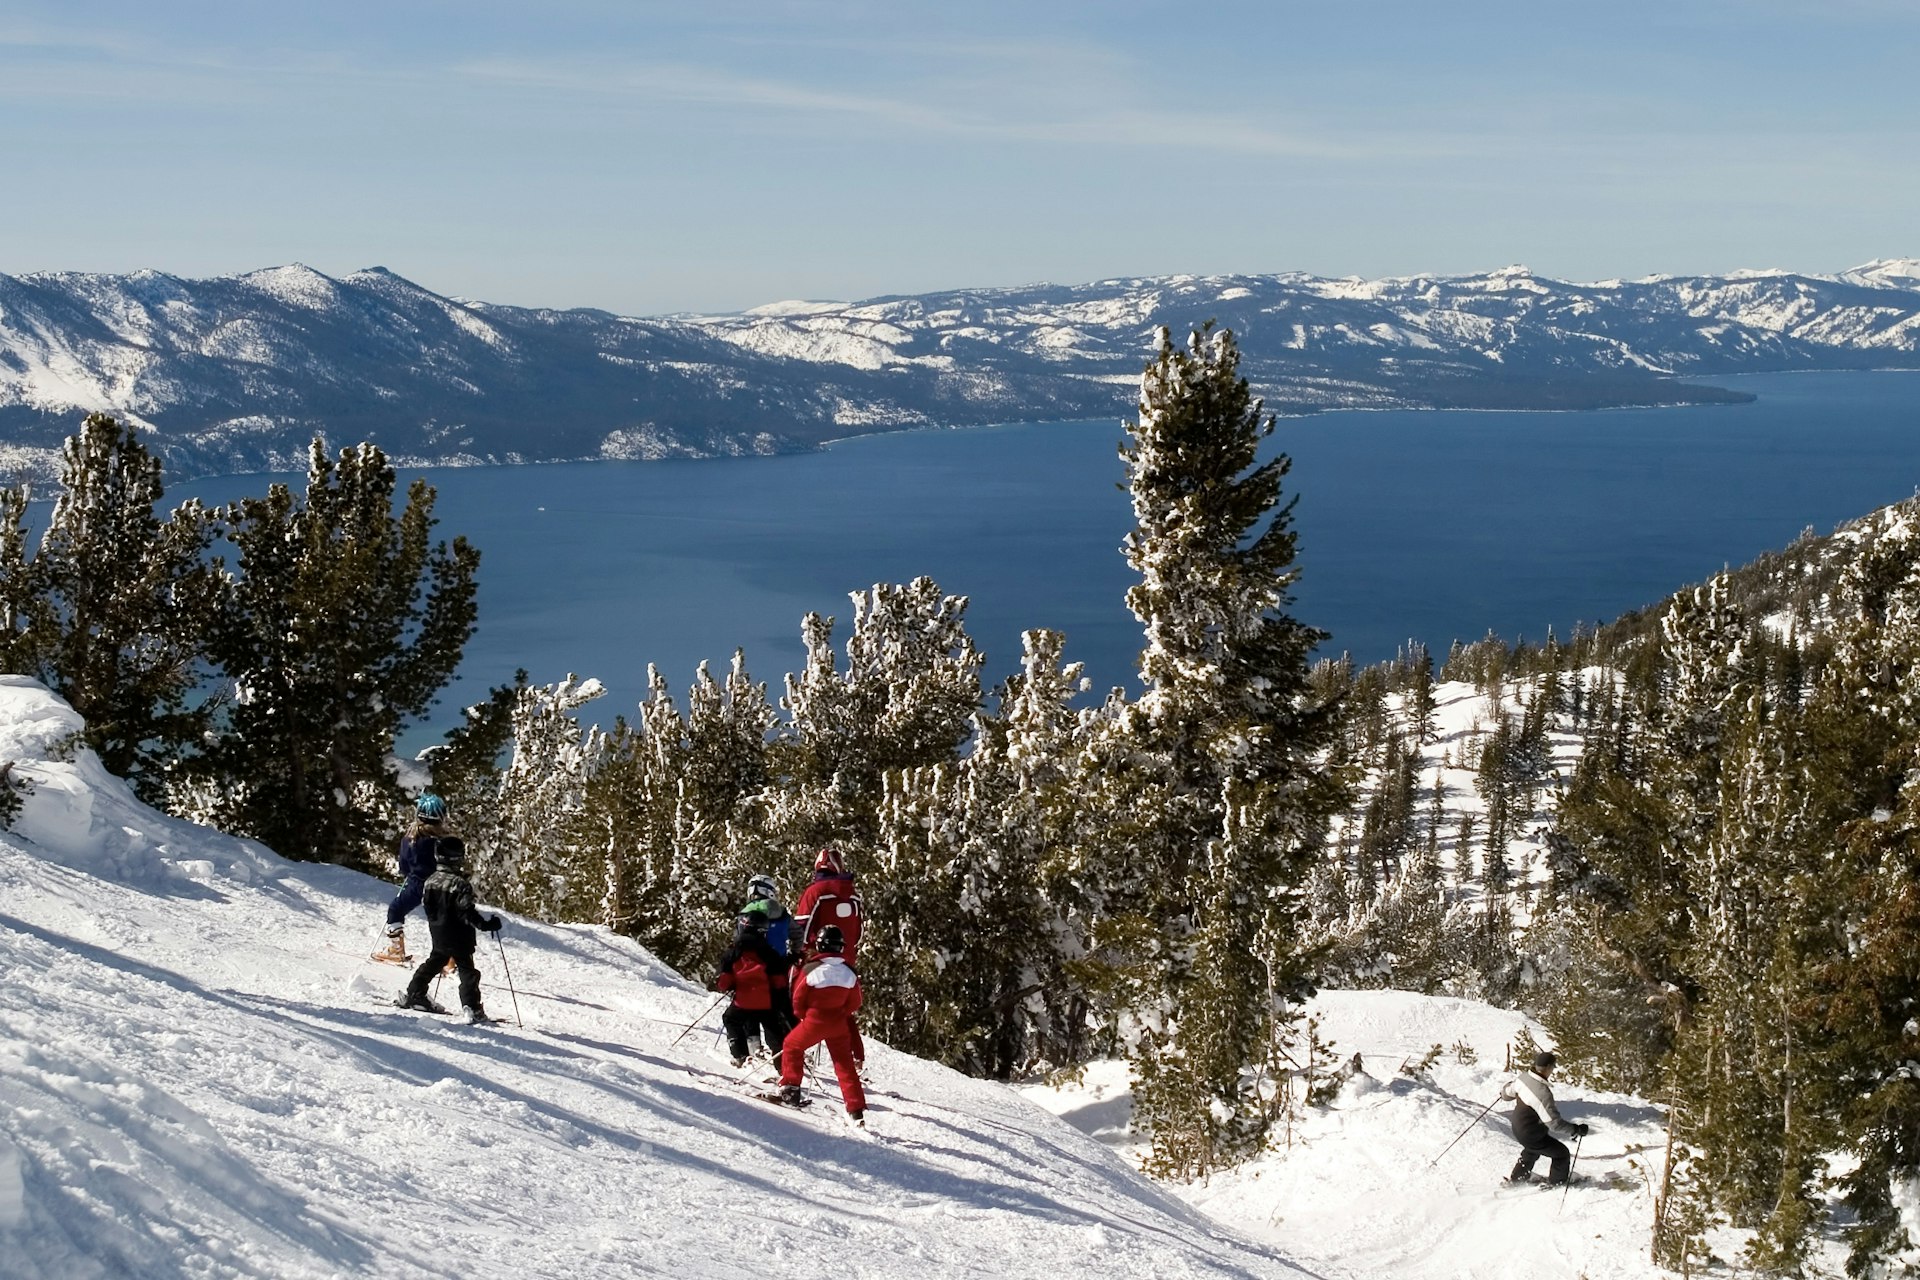 Skiers on a slope at Palisades Tahoe, Olympic Valley, California, USA